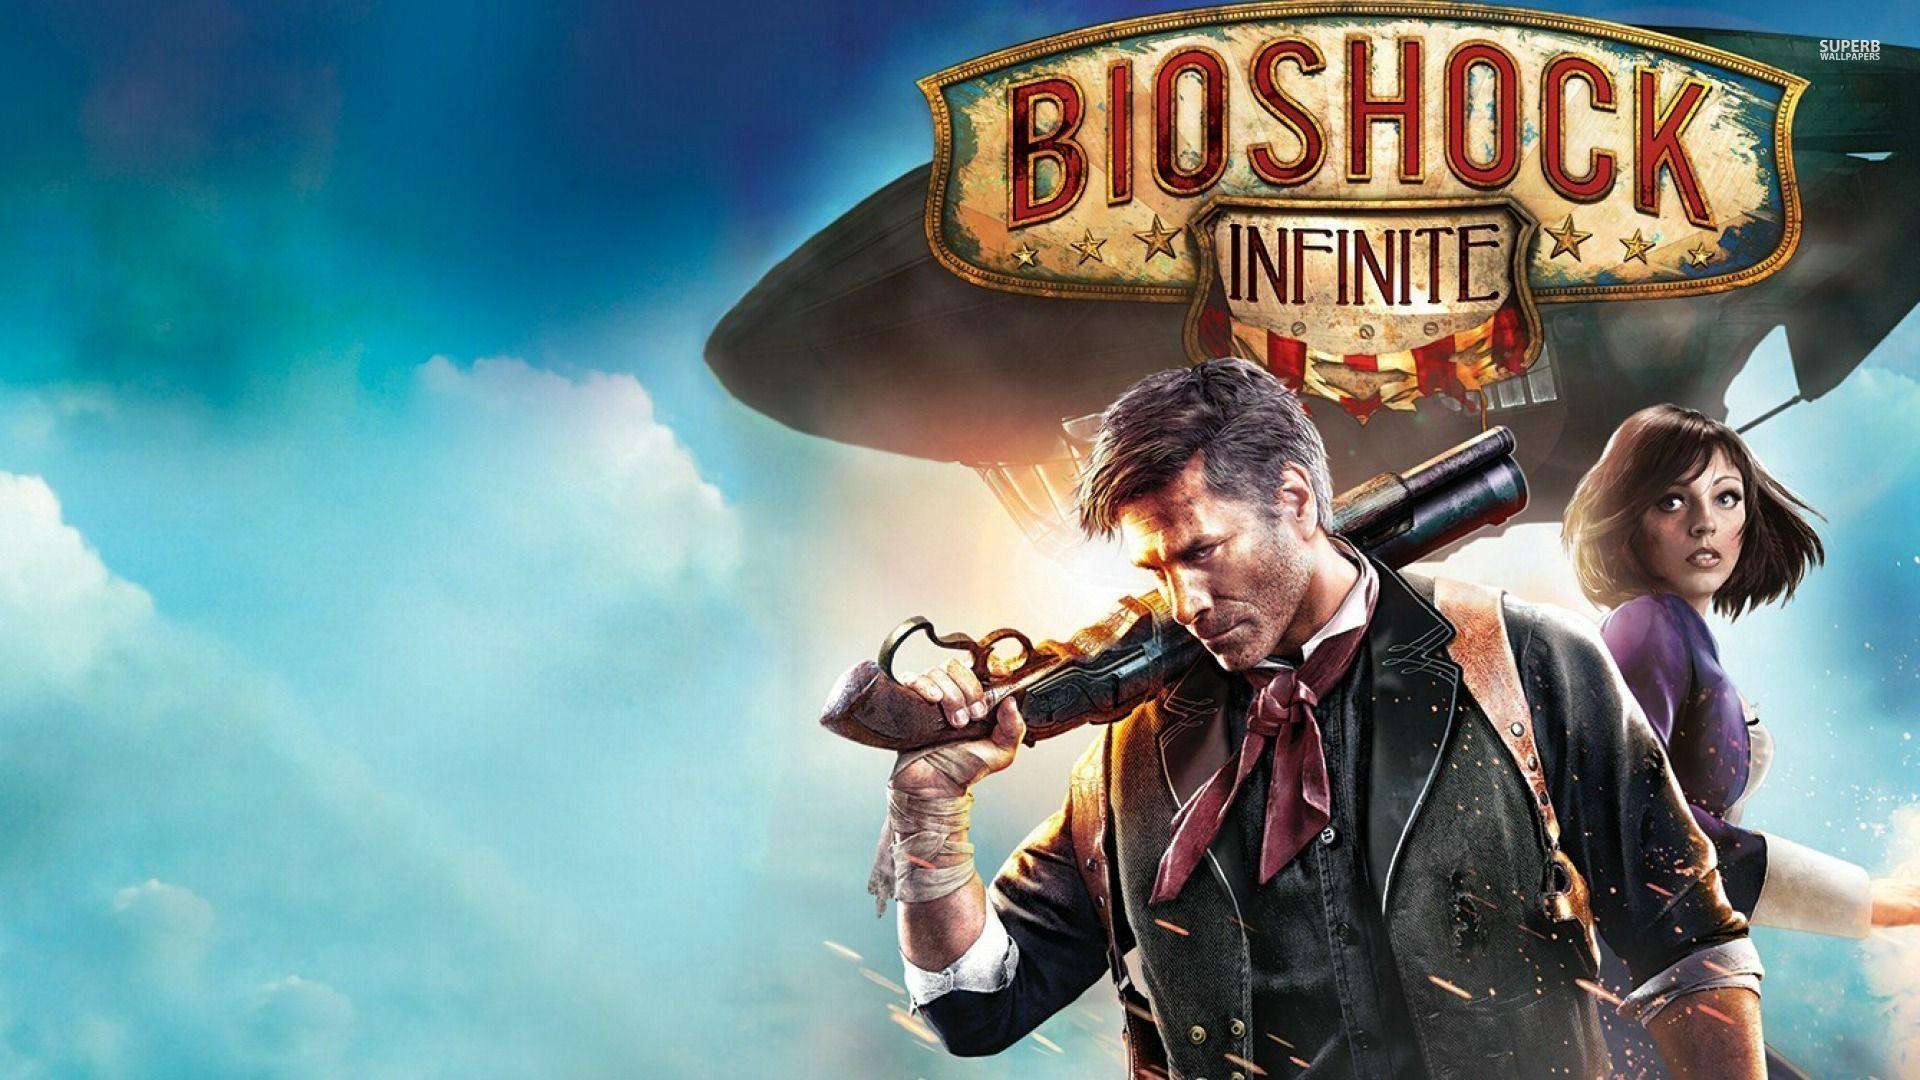 bioshock infinite wallpapers and first person shooter games hd backgrounds   Bioshock Bioshock infinite First person shooter games